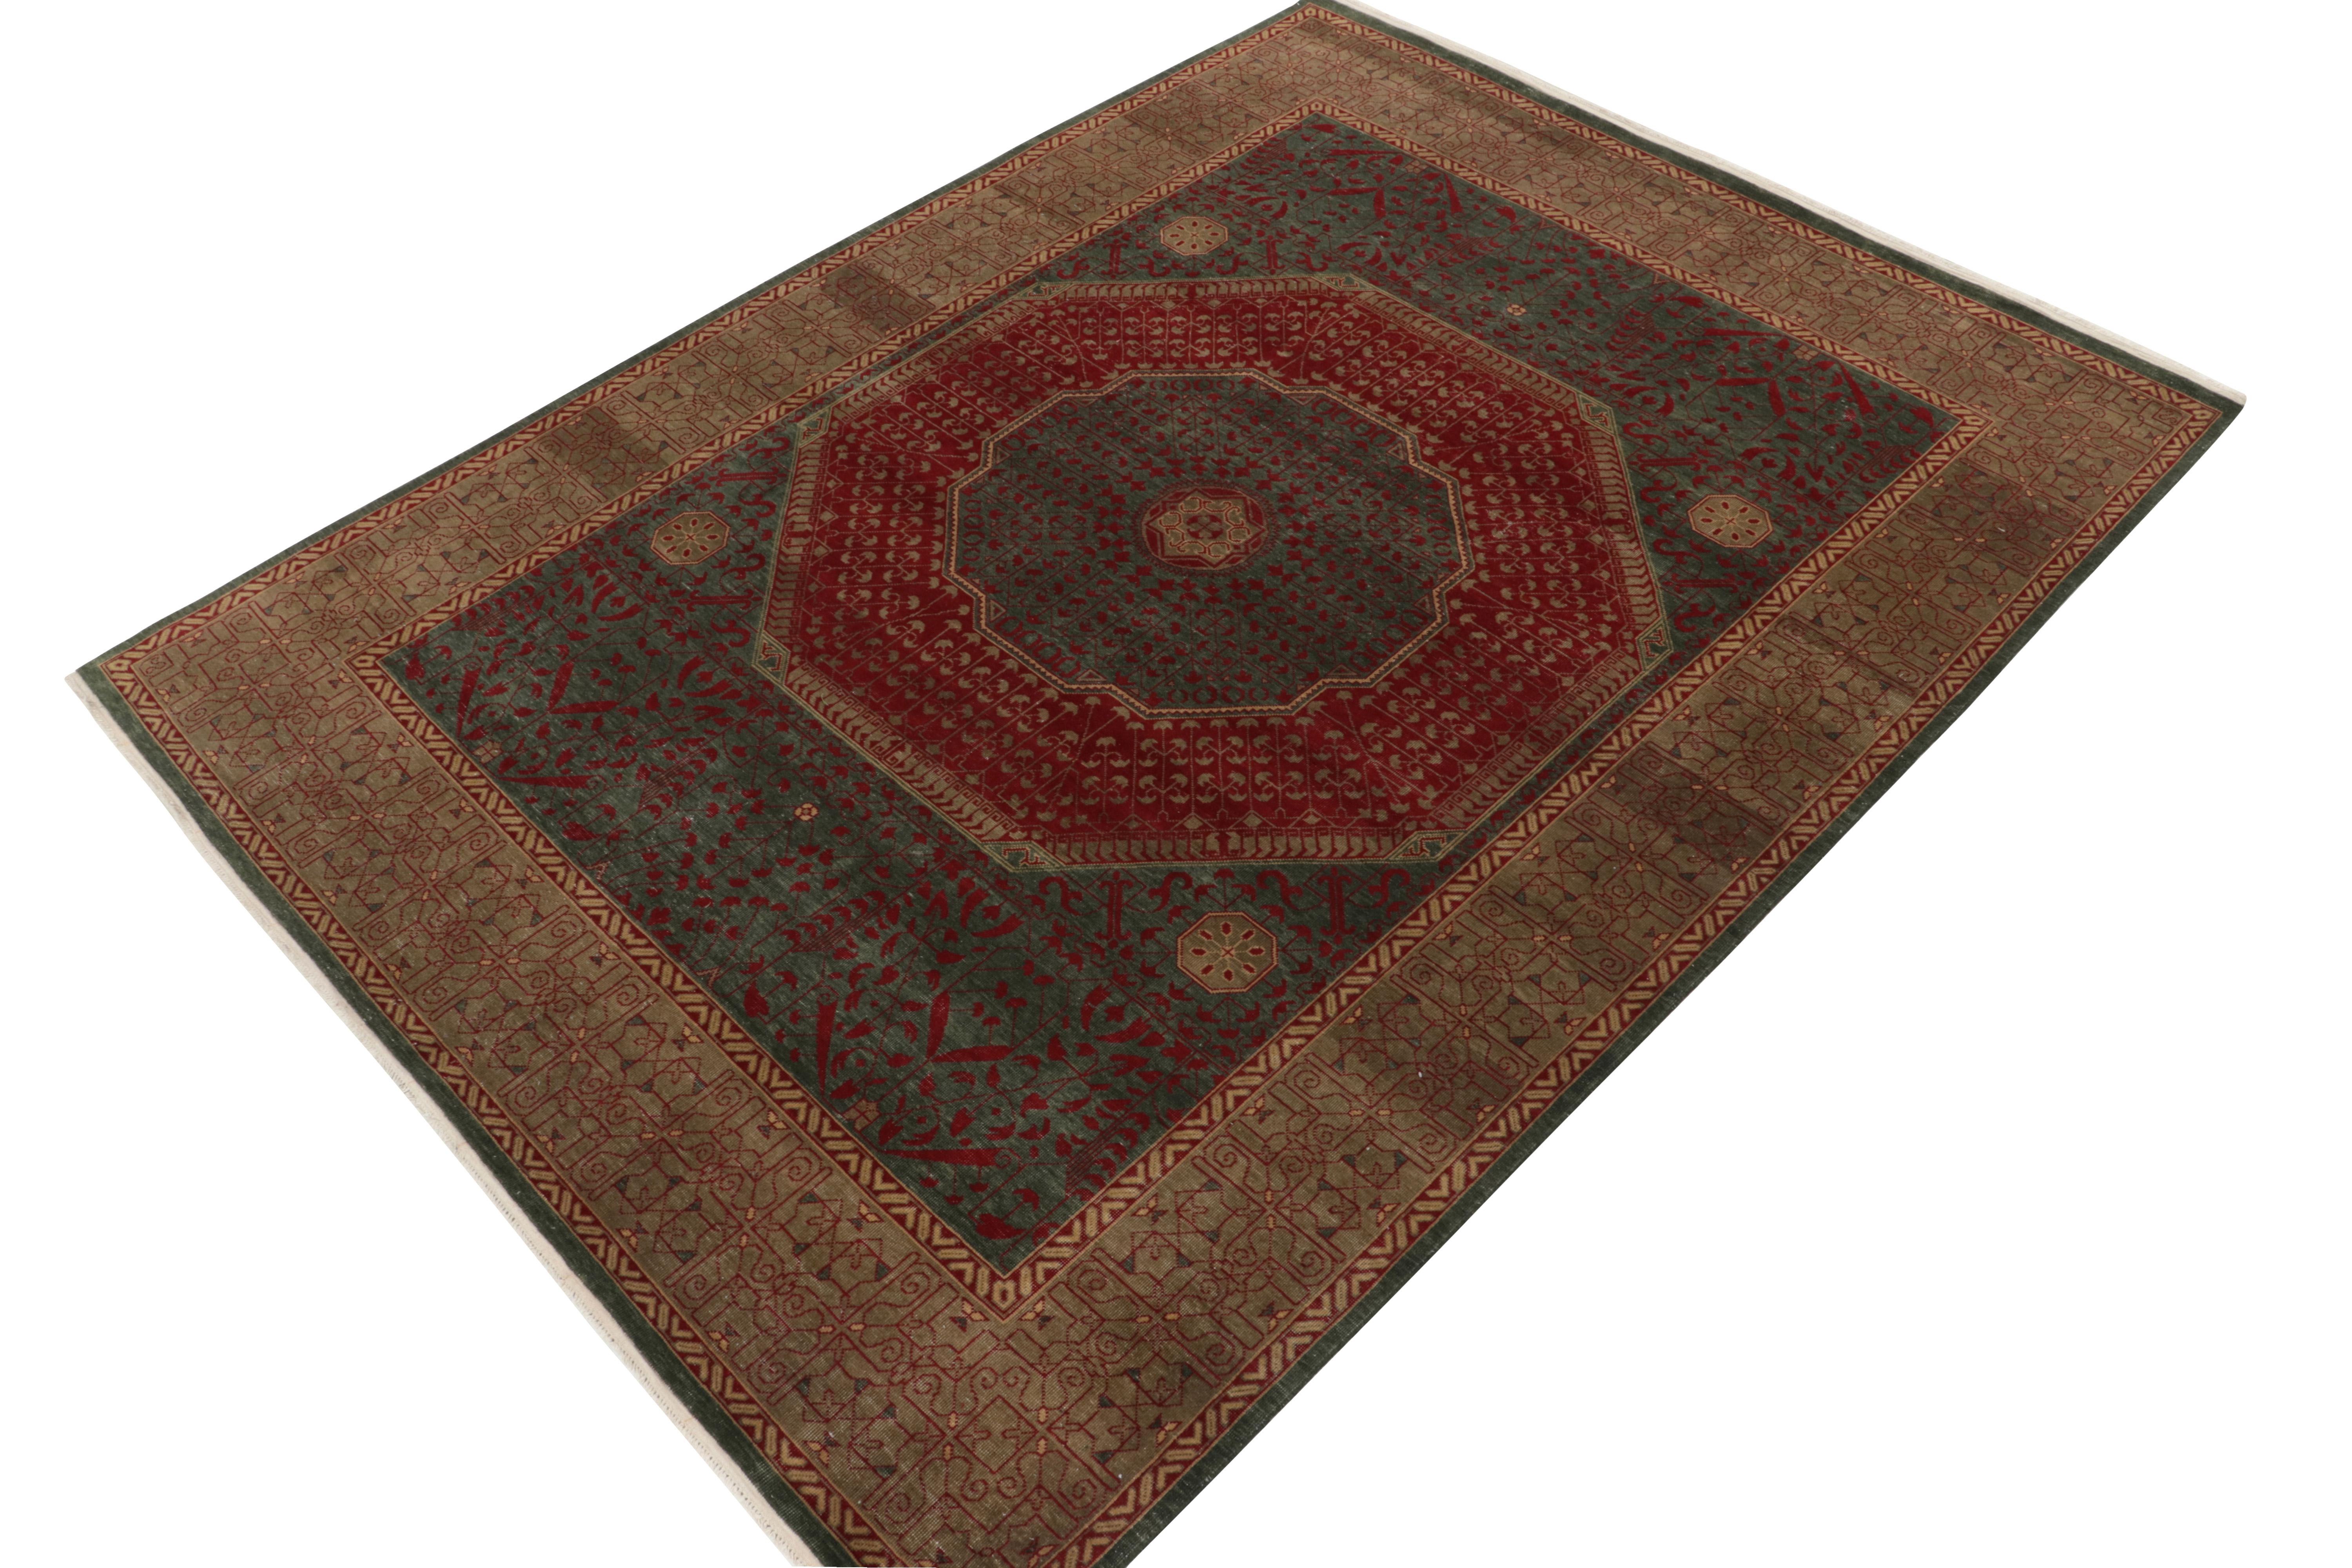 Hand-knotted in fine quality wool & silk, a gorgeous 9x12 rug inspired by 17th century antique Mogul rugs.

On the Design: New to our Modern Classics collection, the design depicts an elaborate classic geometric-floral design in teal green, red &